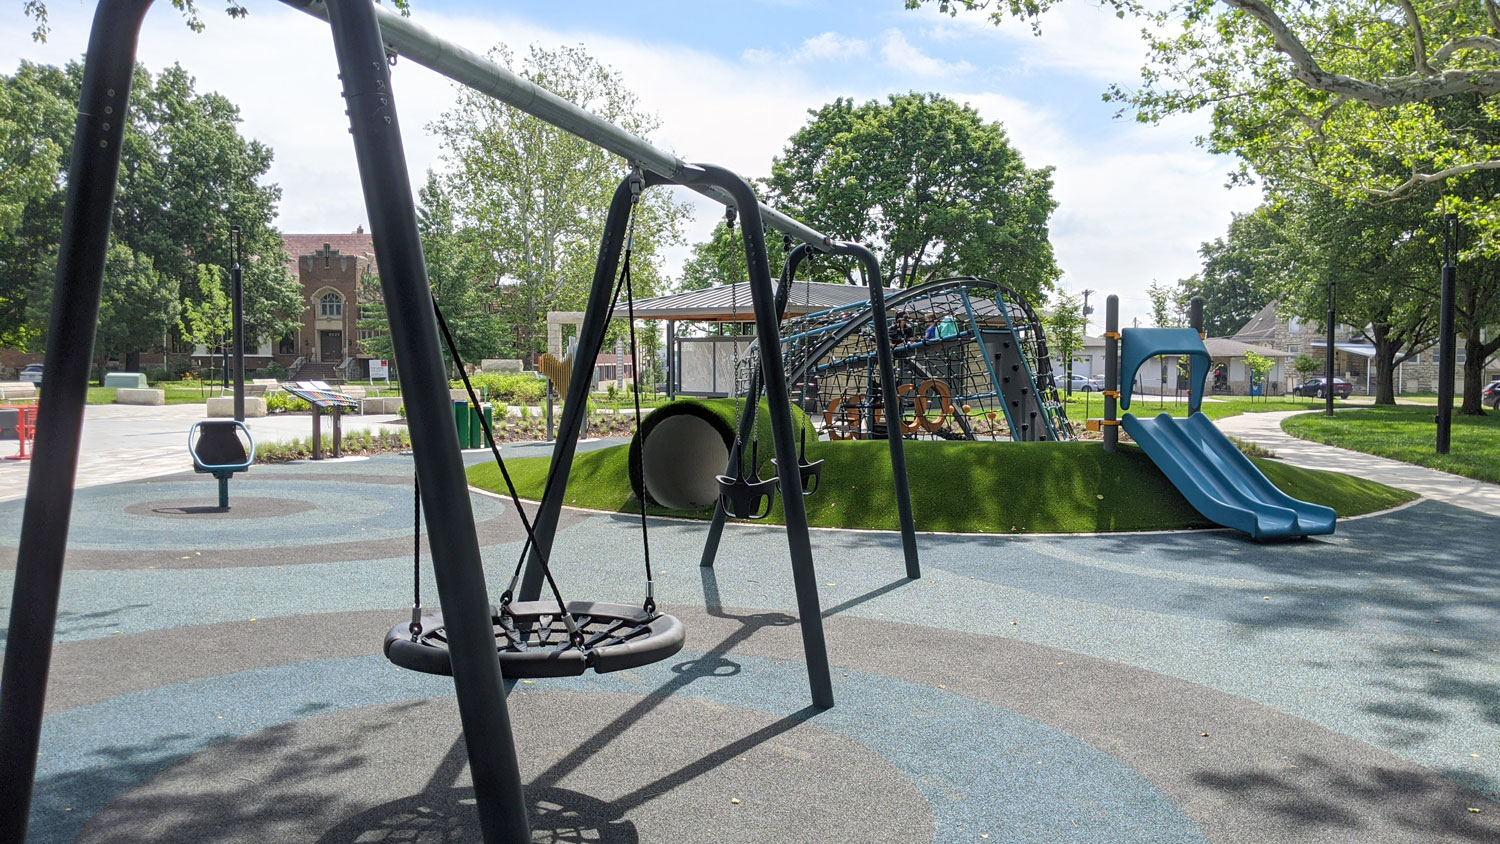 This is an image of downtown overland park thompson park playground swings web